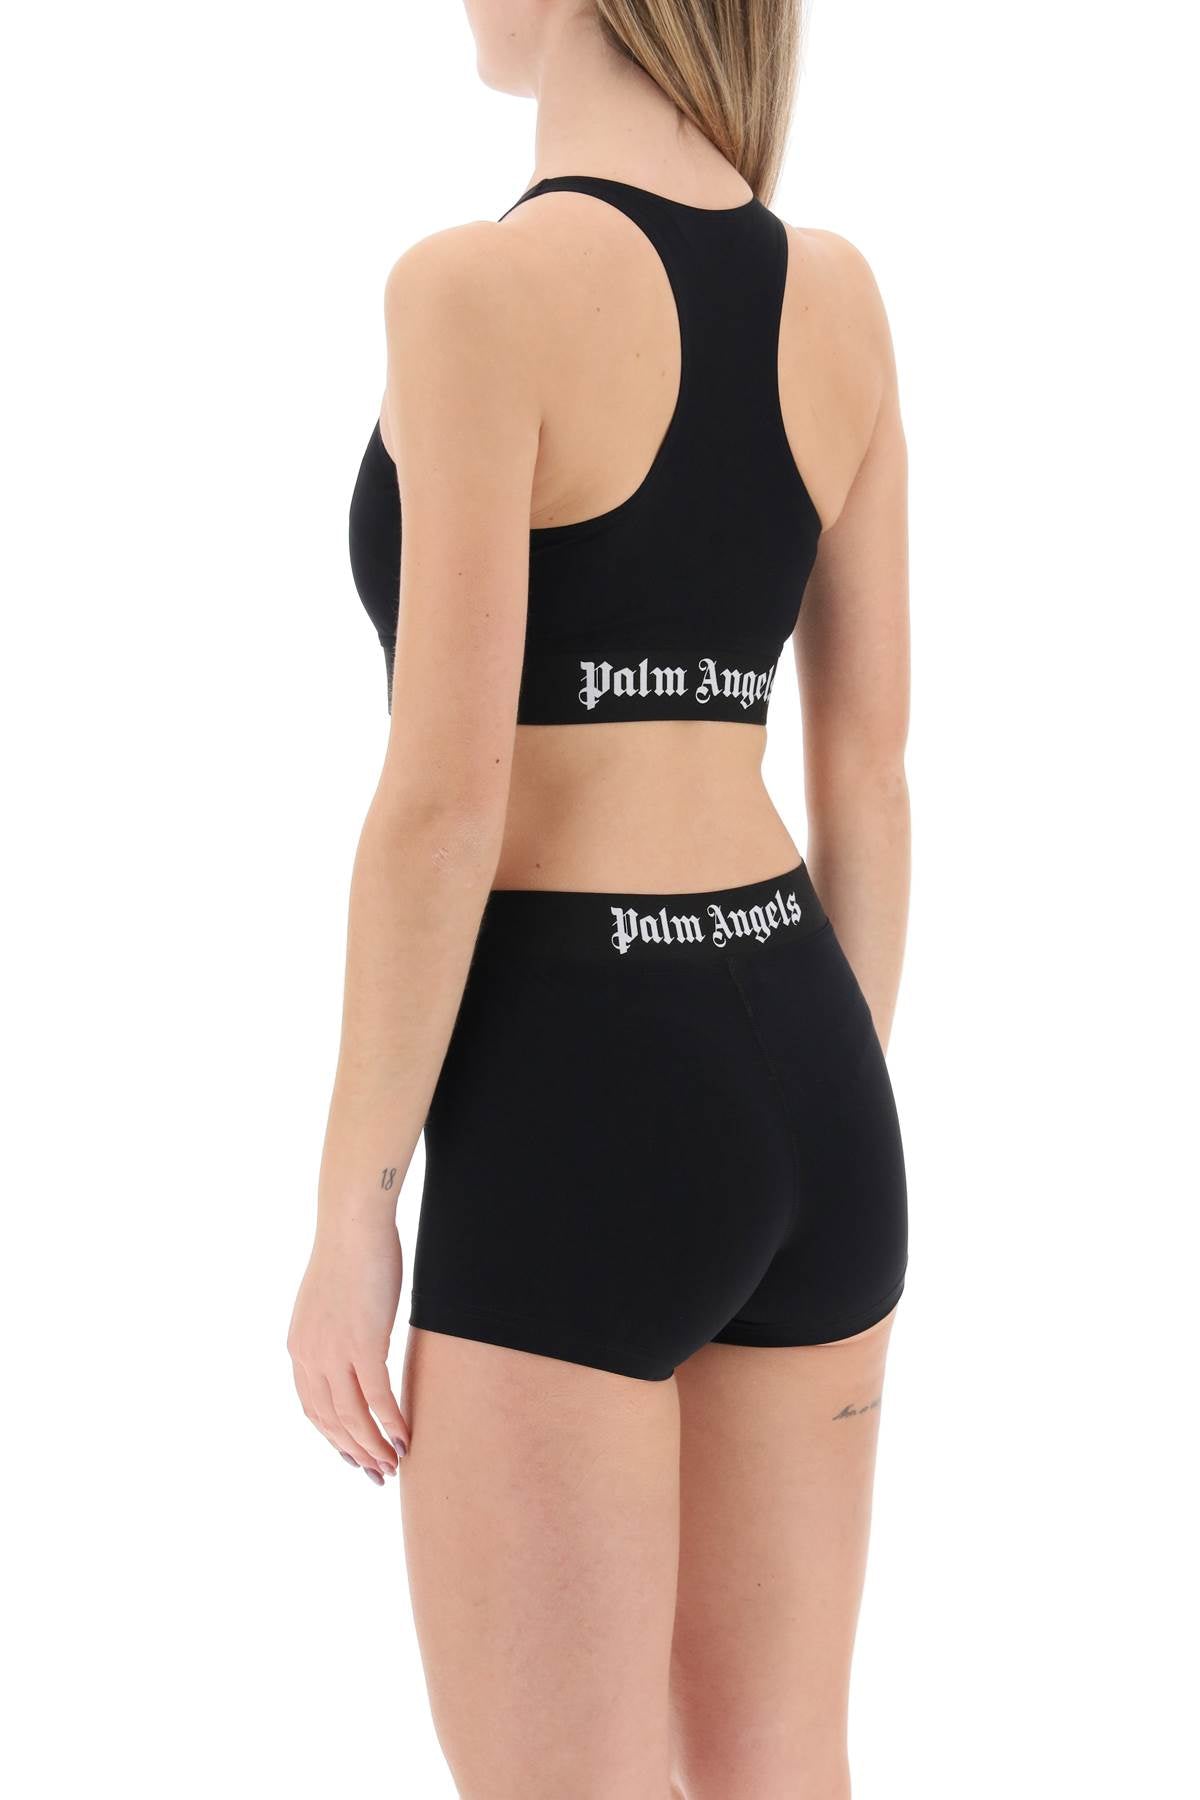 Palm angels "sport bra with branded band"-2